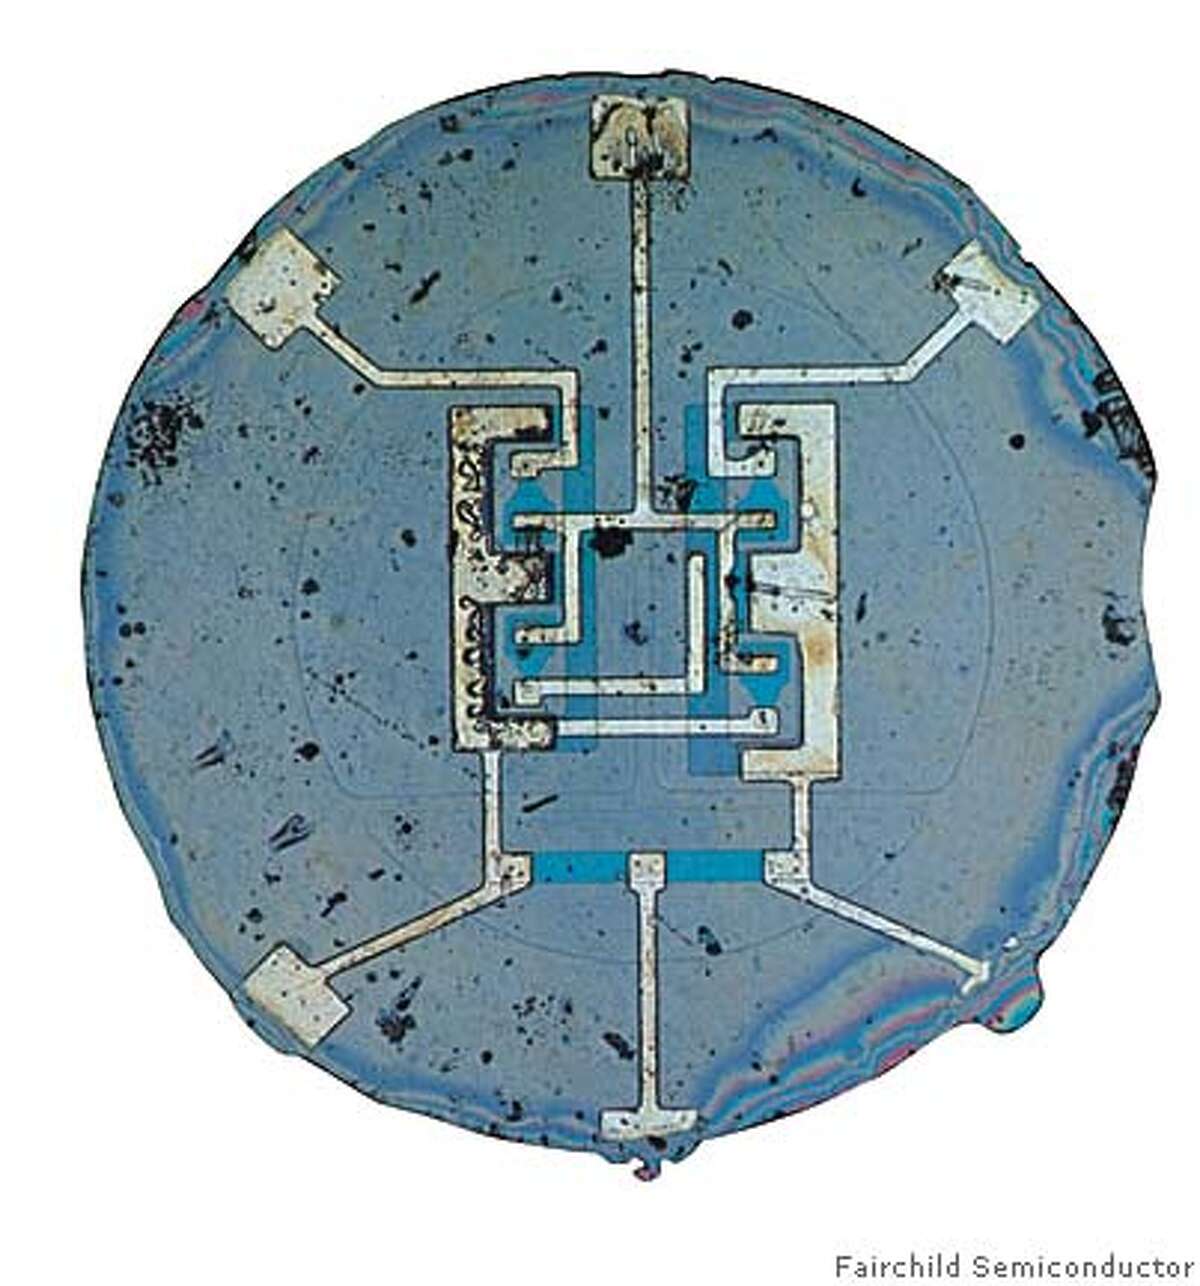 svhistory30_transistor This resistor-transistor logic (RTL) product--a set/reset flip-flop--was the industry's first integrated circuit available as a monolithic chip. Fairchild Semiconductor / Courtesy to The Chronicle